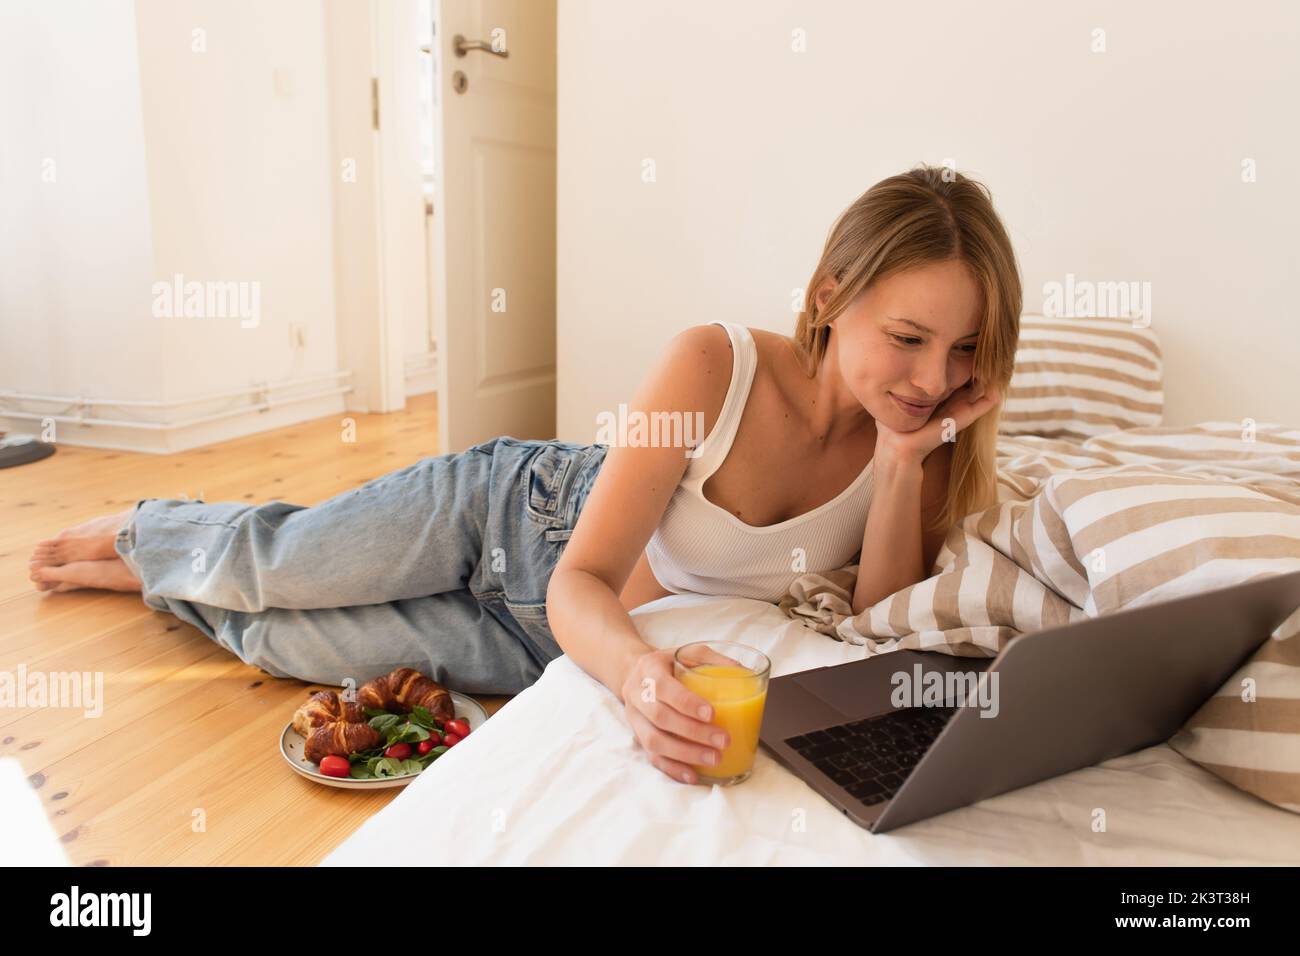 Smiling freelancer looking at laptop and holding orange juice near tasty breakfast on floor at home,stock image Stock Photo